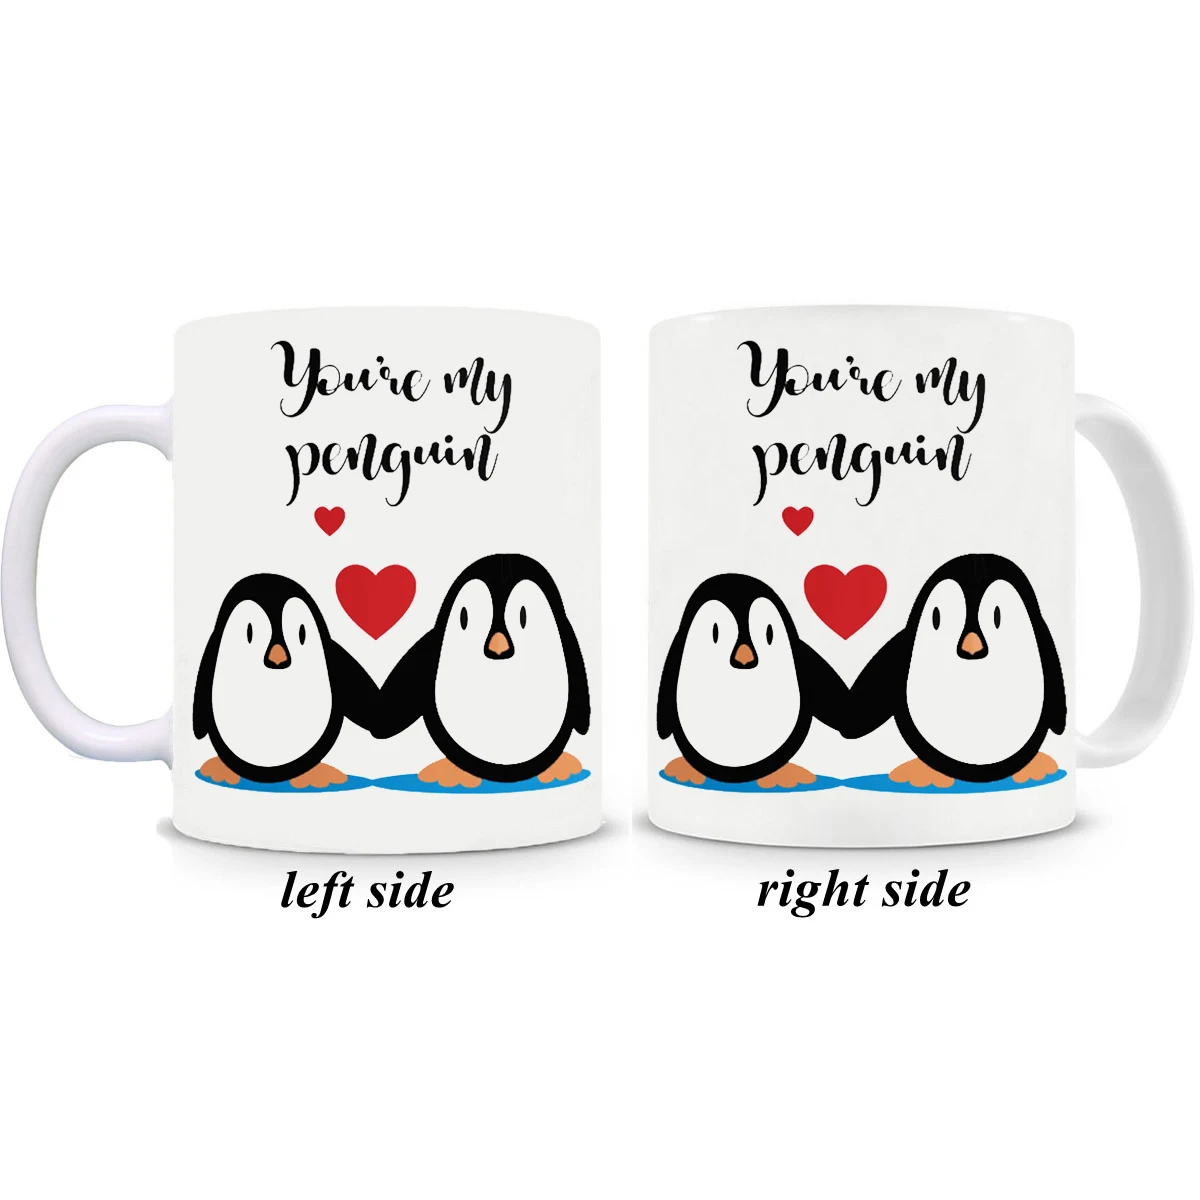 

Valentines Gift You're My Penguin Mugs Girlfriend Gifts Wife Gifts Coffee Mugs Home Decor Birthday Gifts Milk Mugs Beer Cups